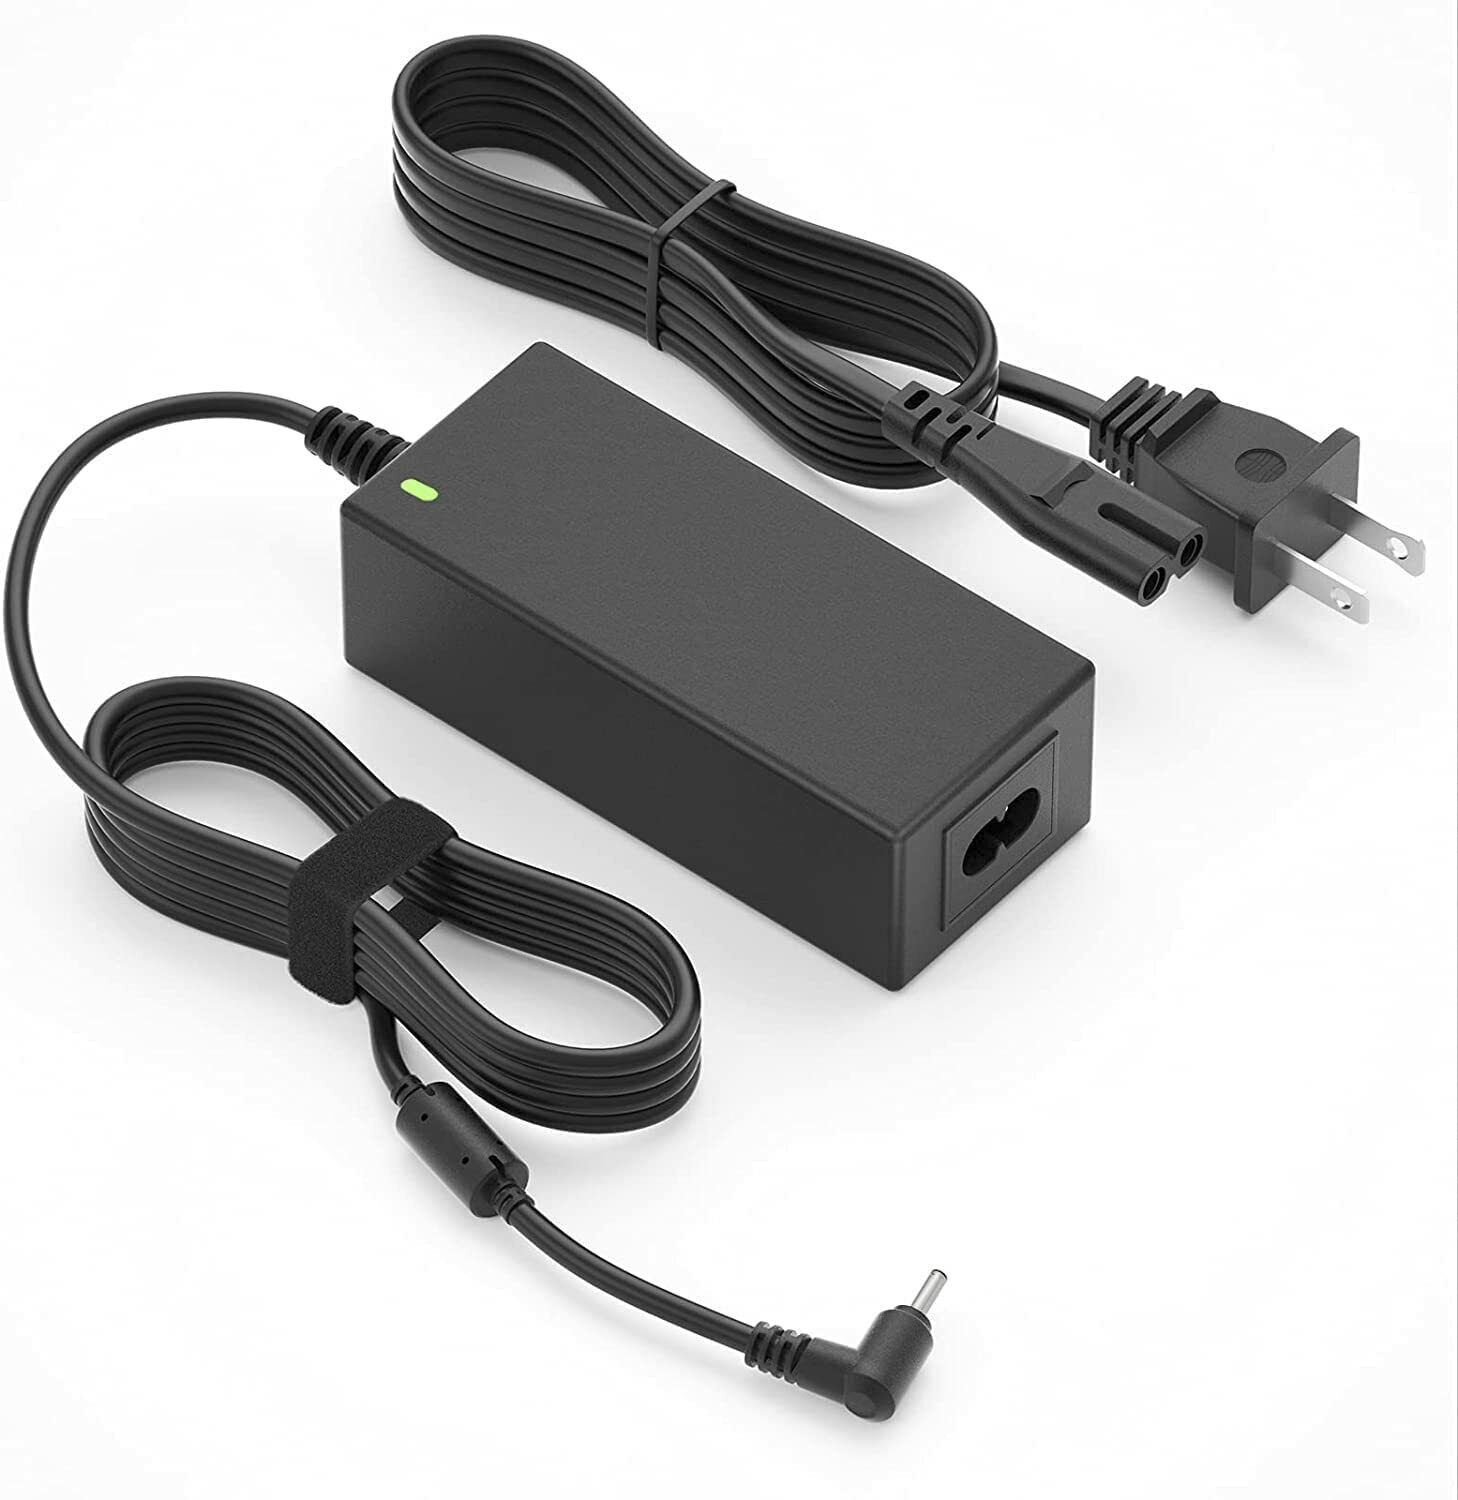 AC Adapter Charger for Booster PAC ES5000 ES2500 J900 Jump Starter Power Supply Bundled Items Power Cable Compatible Br